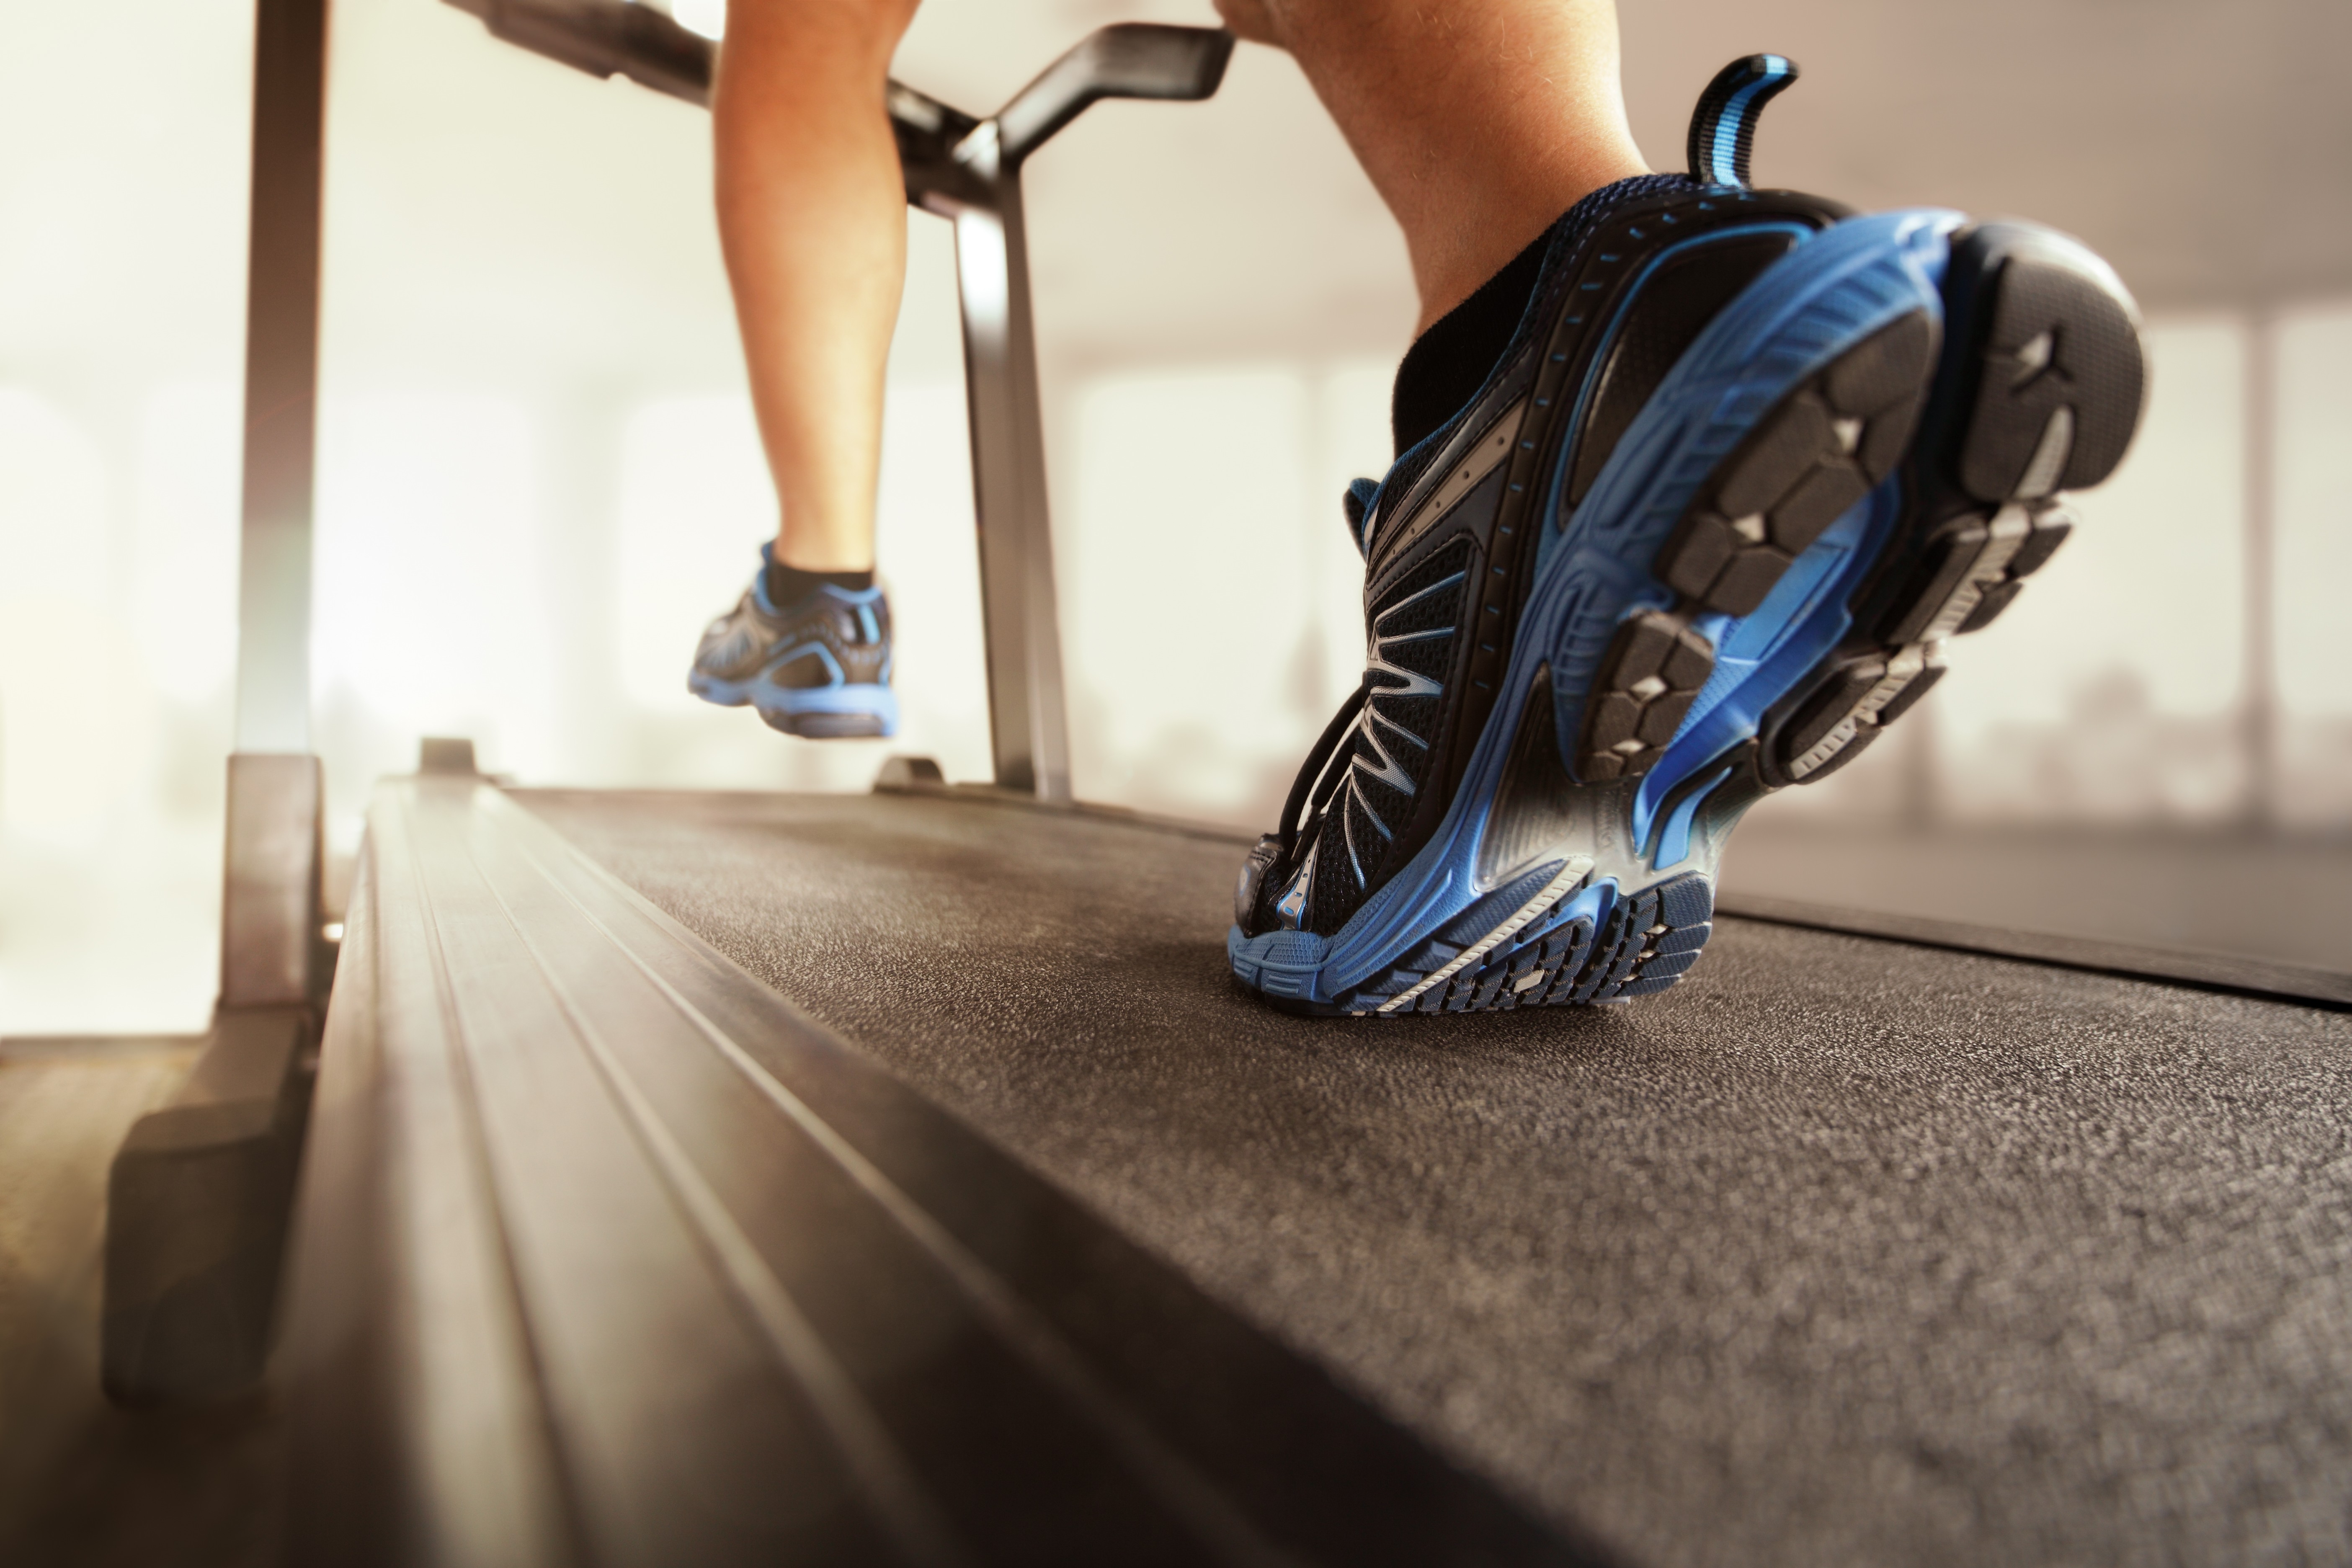 People 5616x3744 running treadmills sport shoes working out indoors closeup